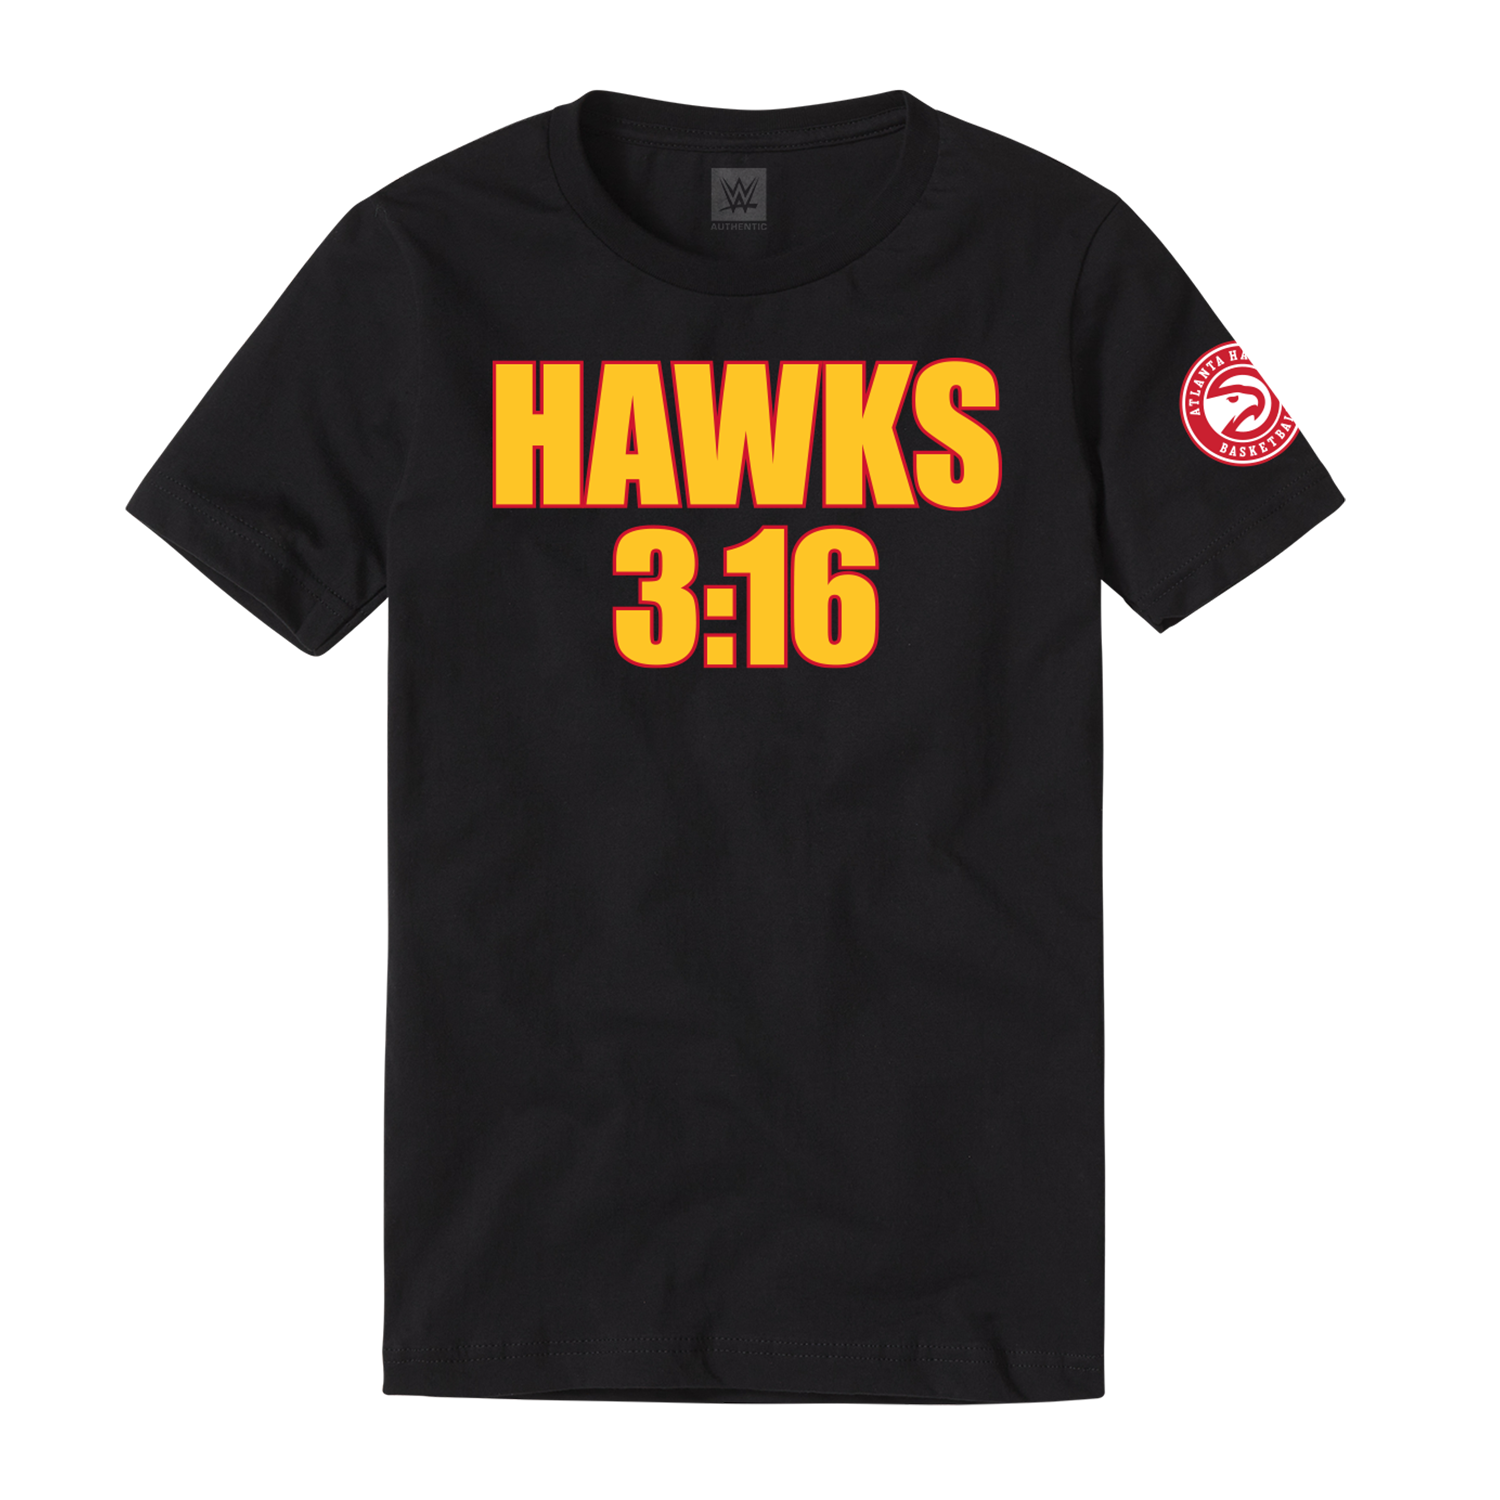 Hawks 316 - front of shirt.png